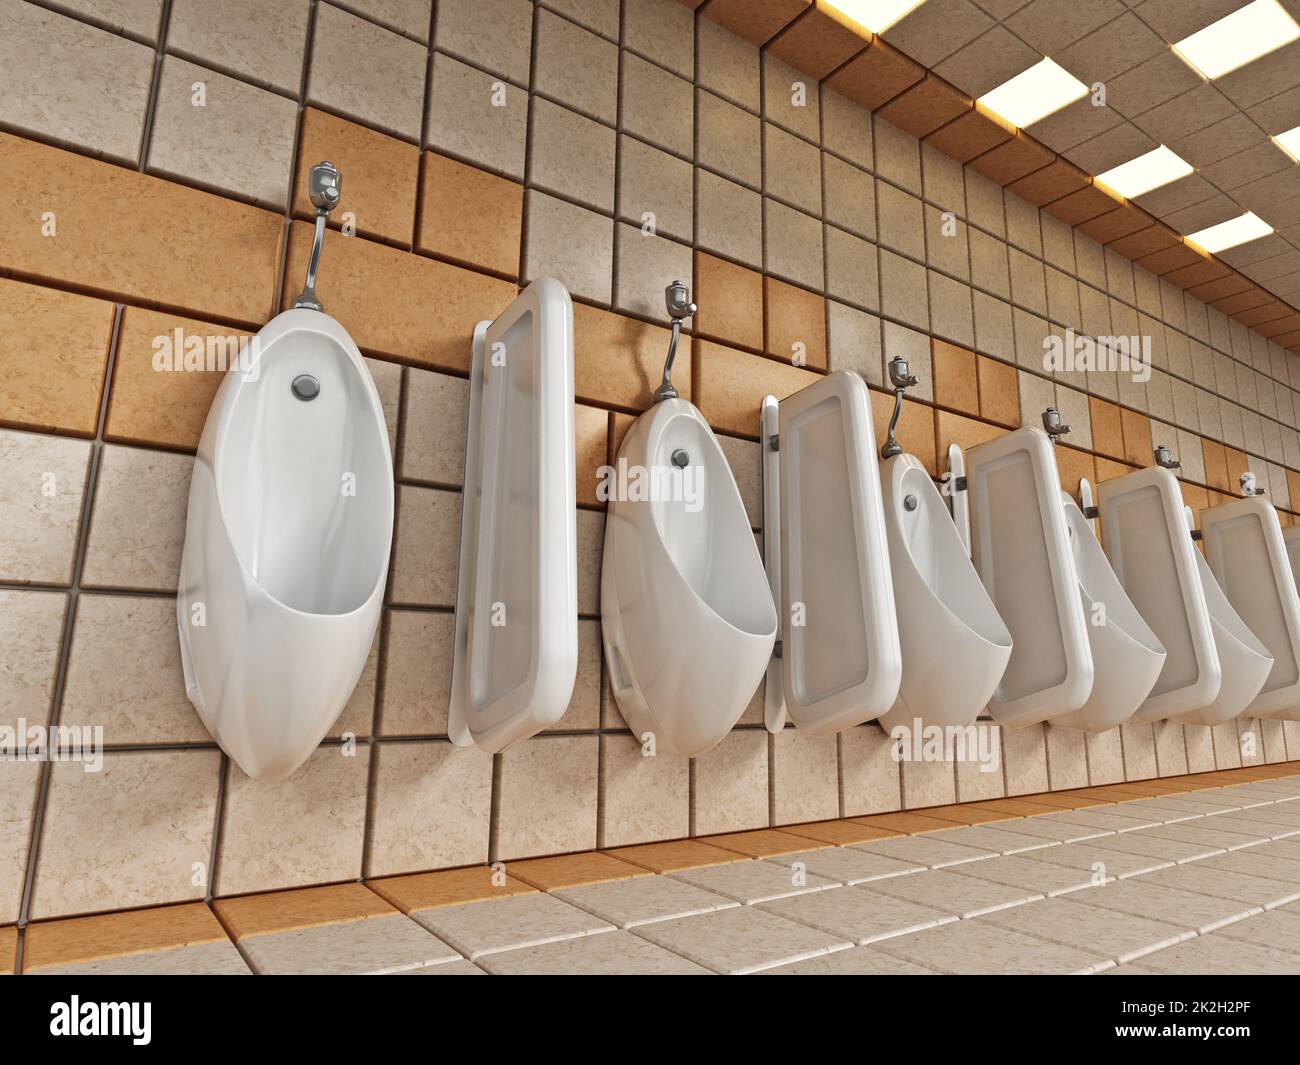 Public restroom with urinals Stock Photo